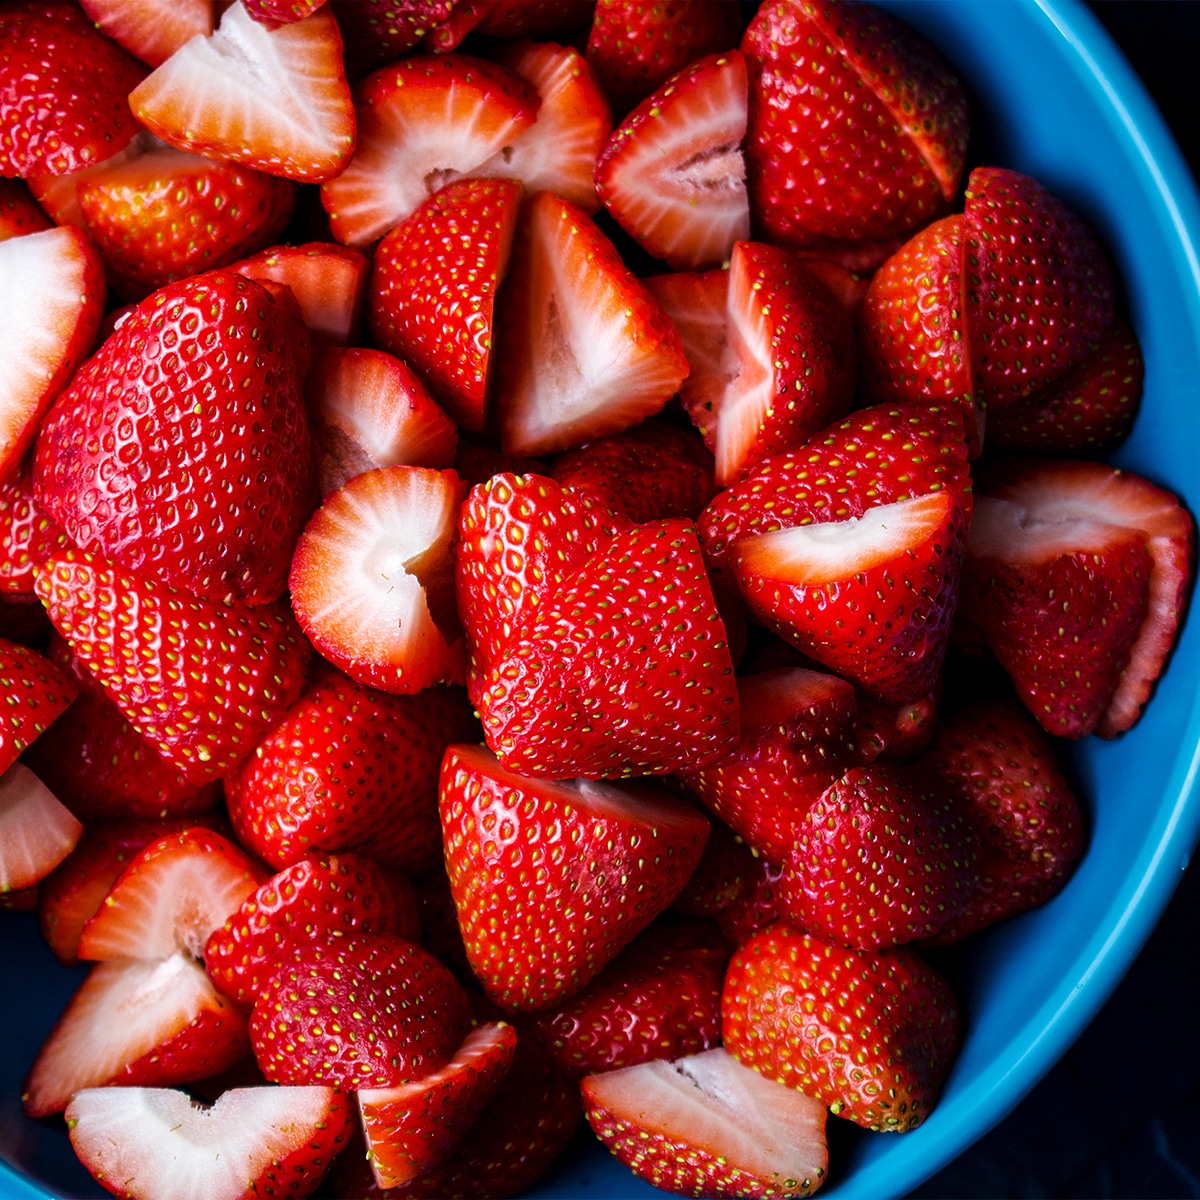 A bowl of bright red, ripe strawberries that have been cut in half.